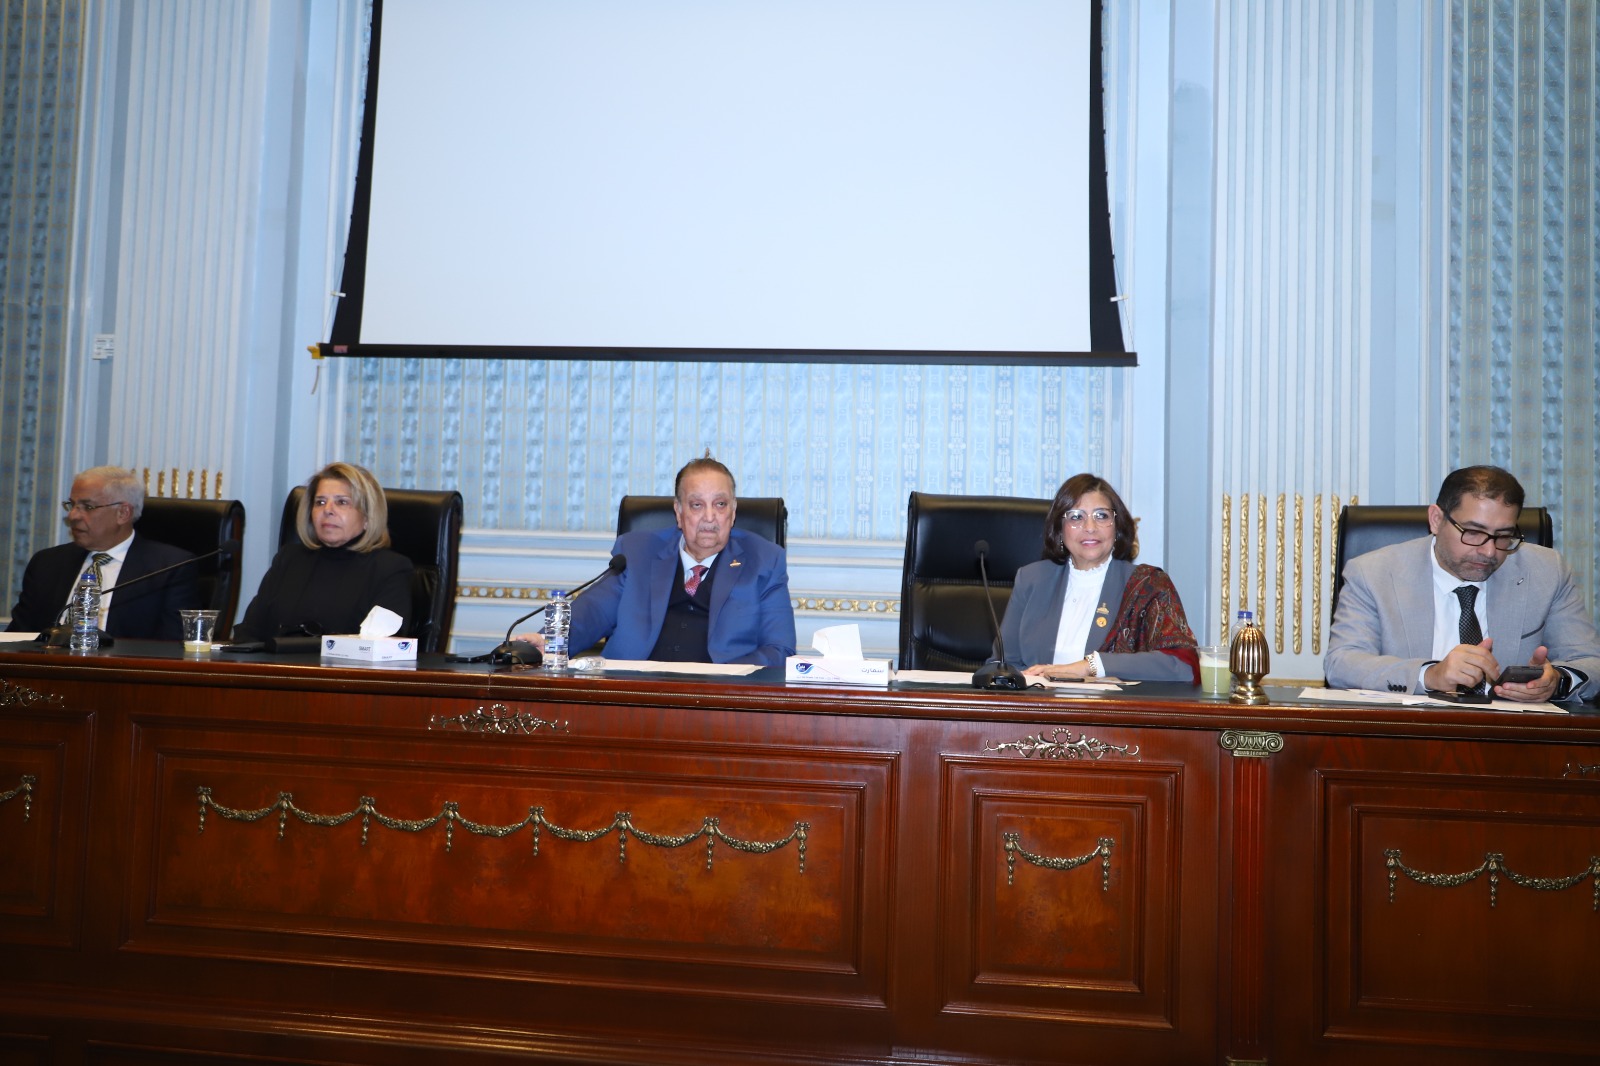  Youth participation in reformulation of human rights curricula  a fundamental step towards promoting a culture of human rights in Egypt: Moushira Khattab 